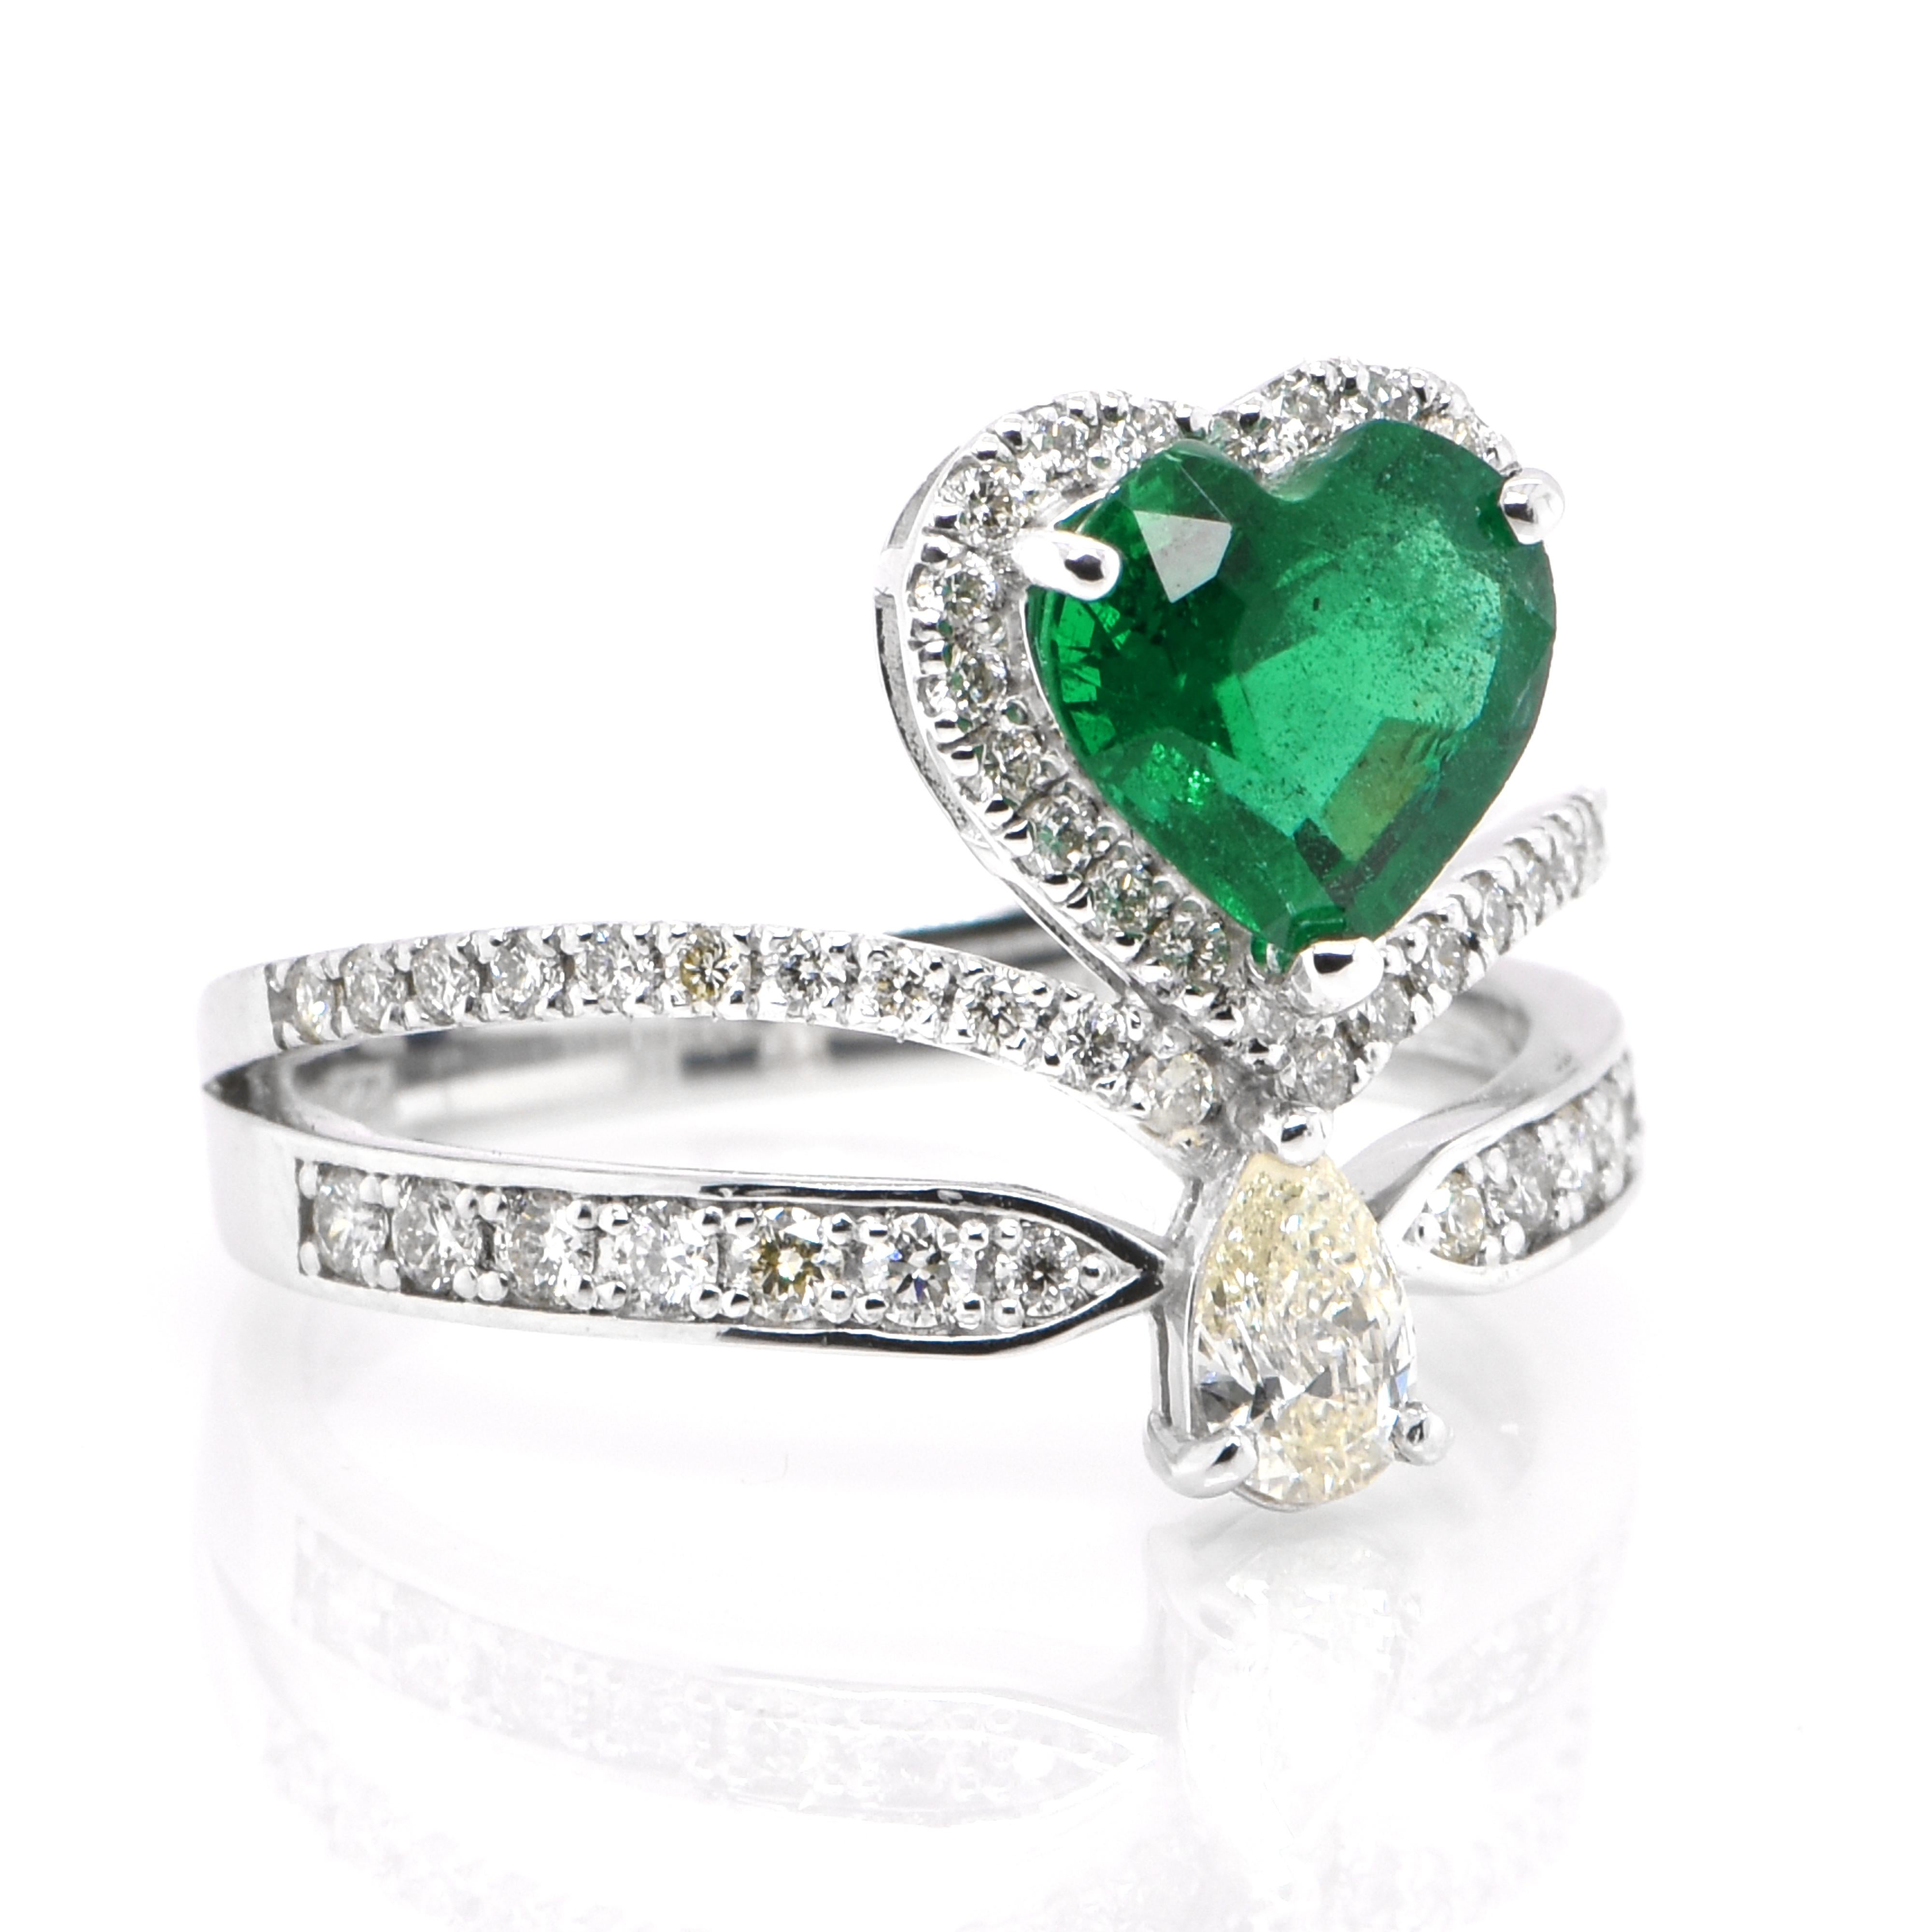 Modern 1.20 Carat Heart-Cut, Zambian Emerald and Diamond Crown Ring Set in Platinum For Sale